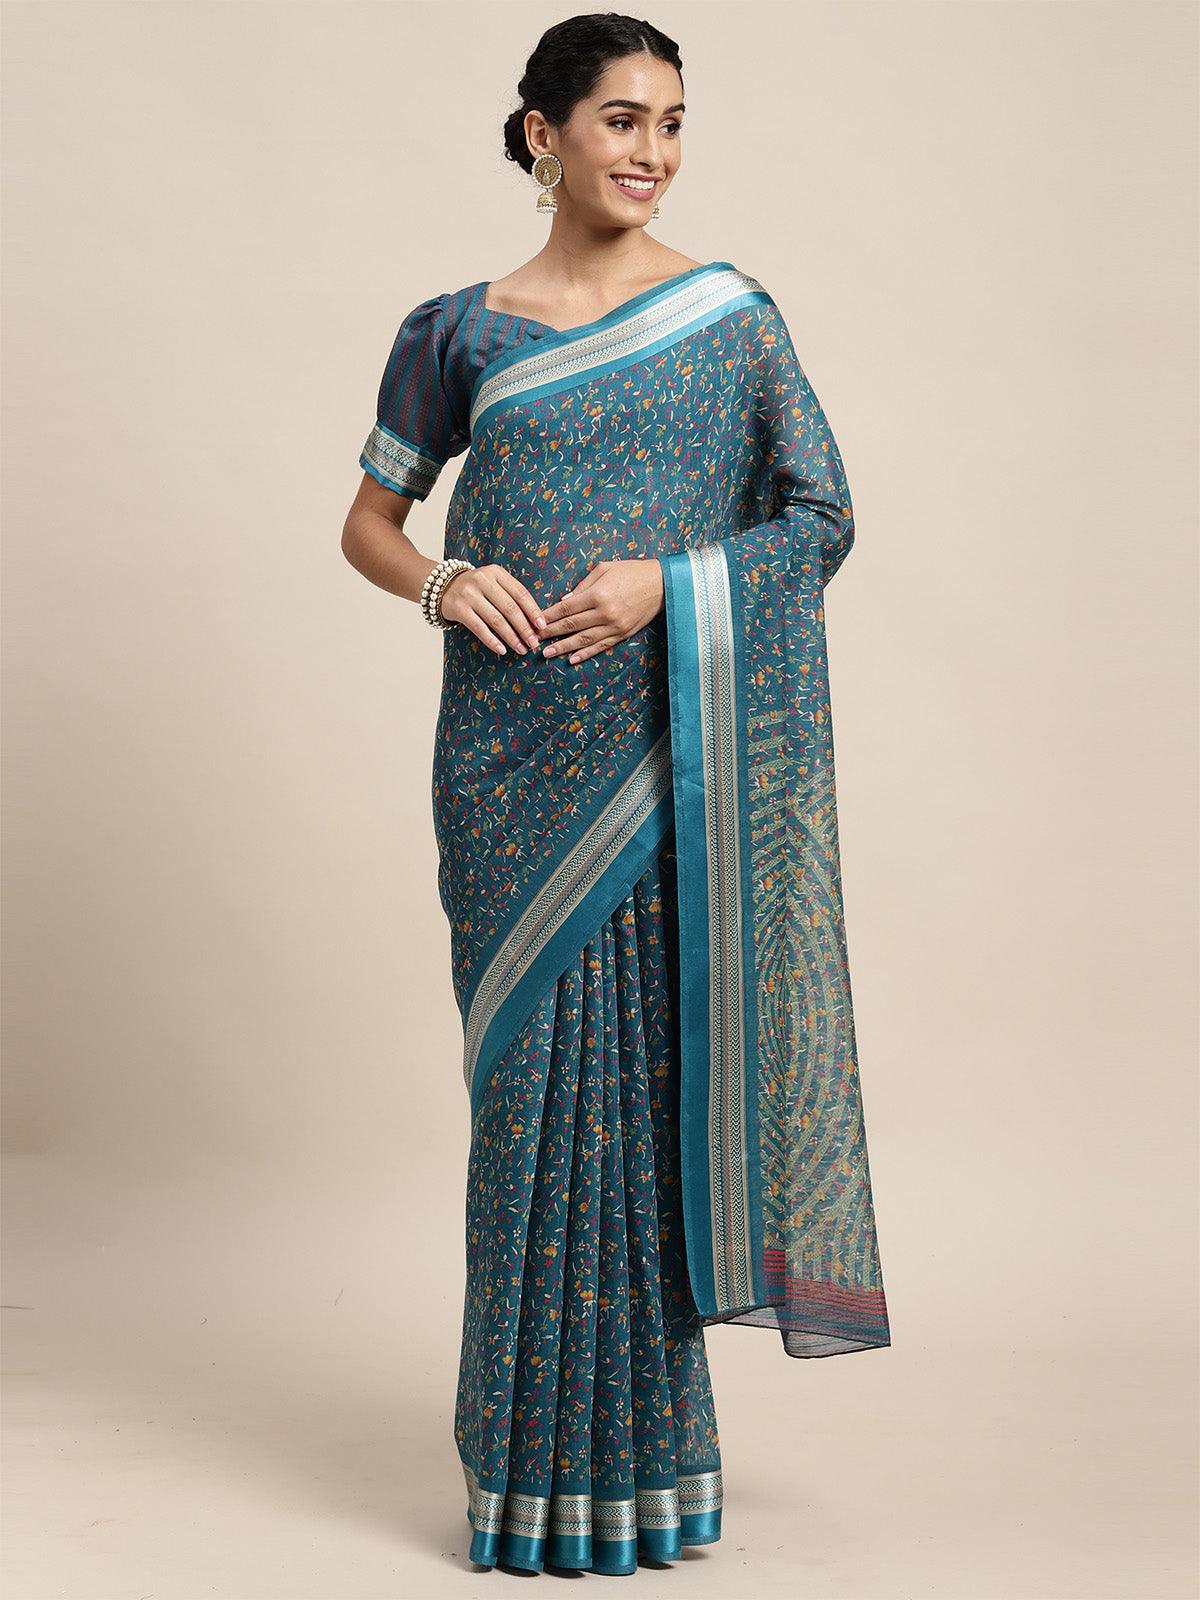 Cotton Silk Turquoise Printed Saree With Blouse Piece - Odette